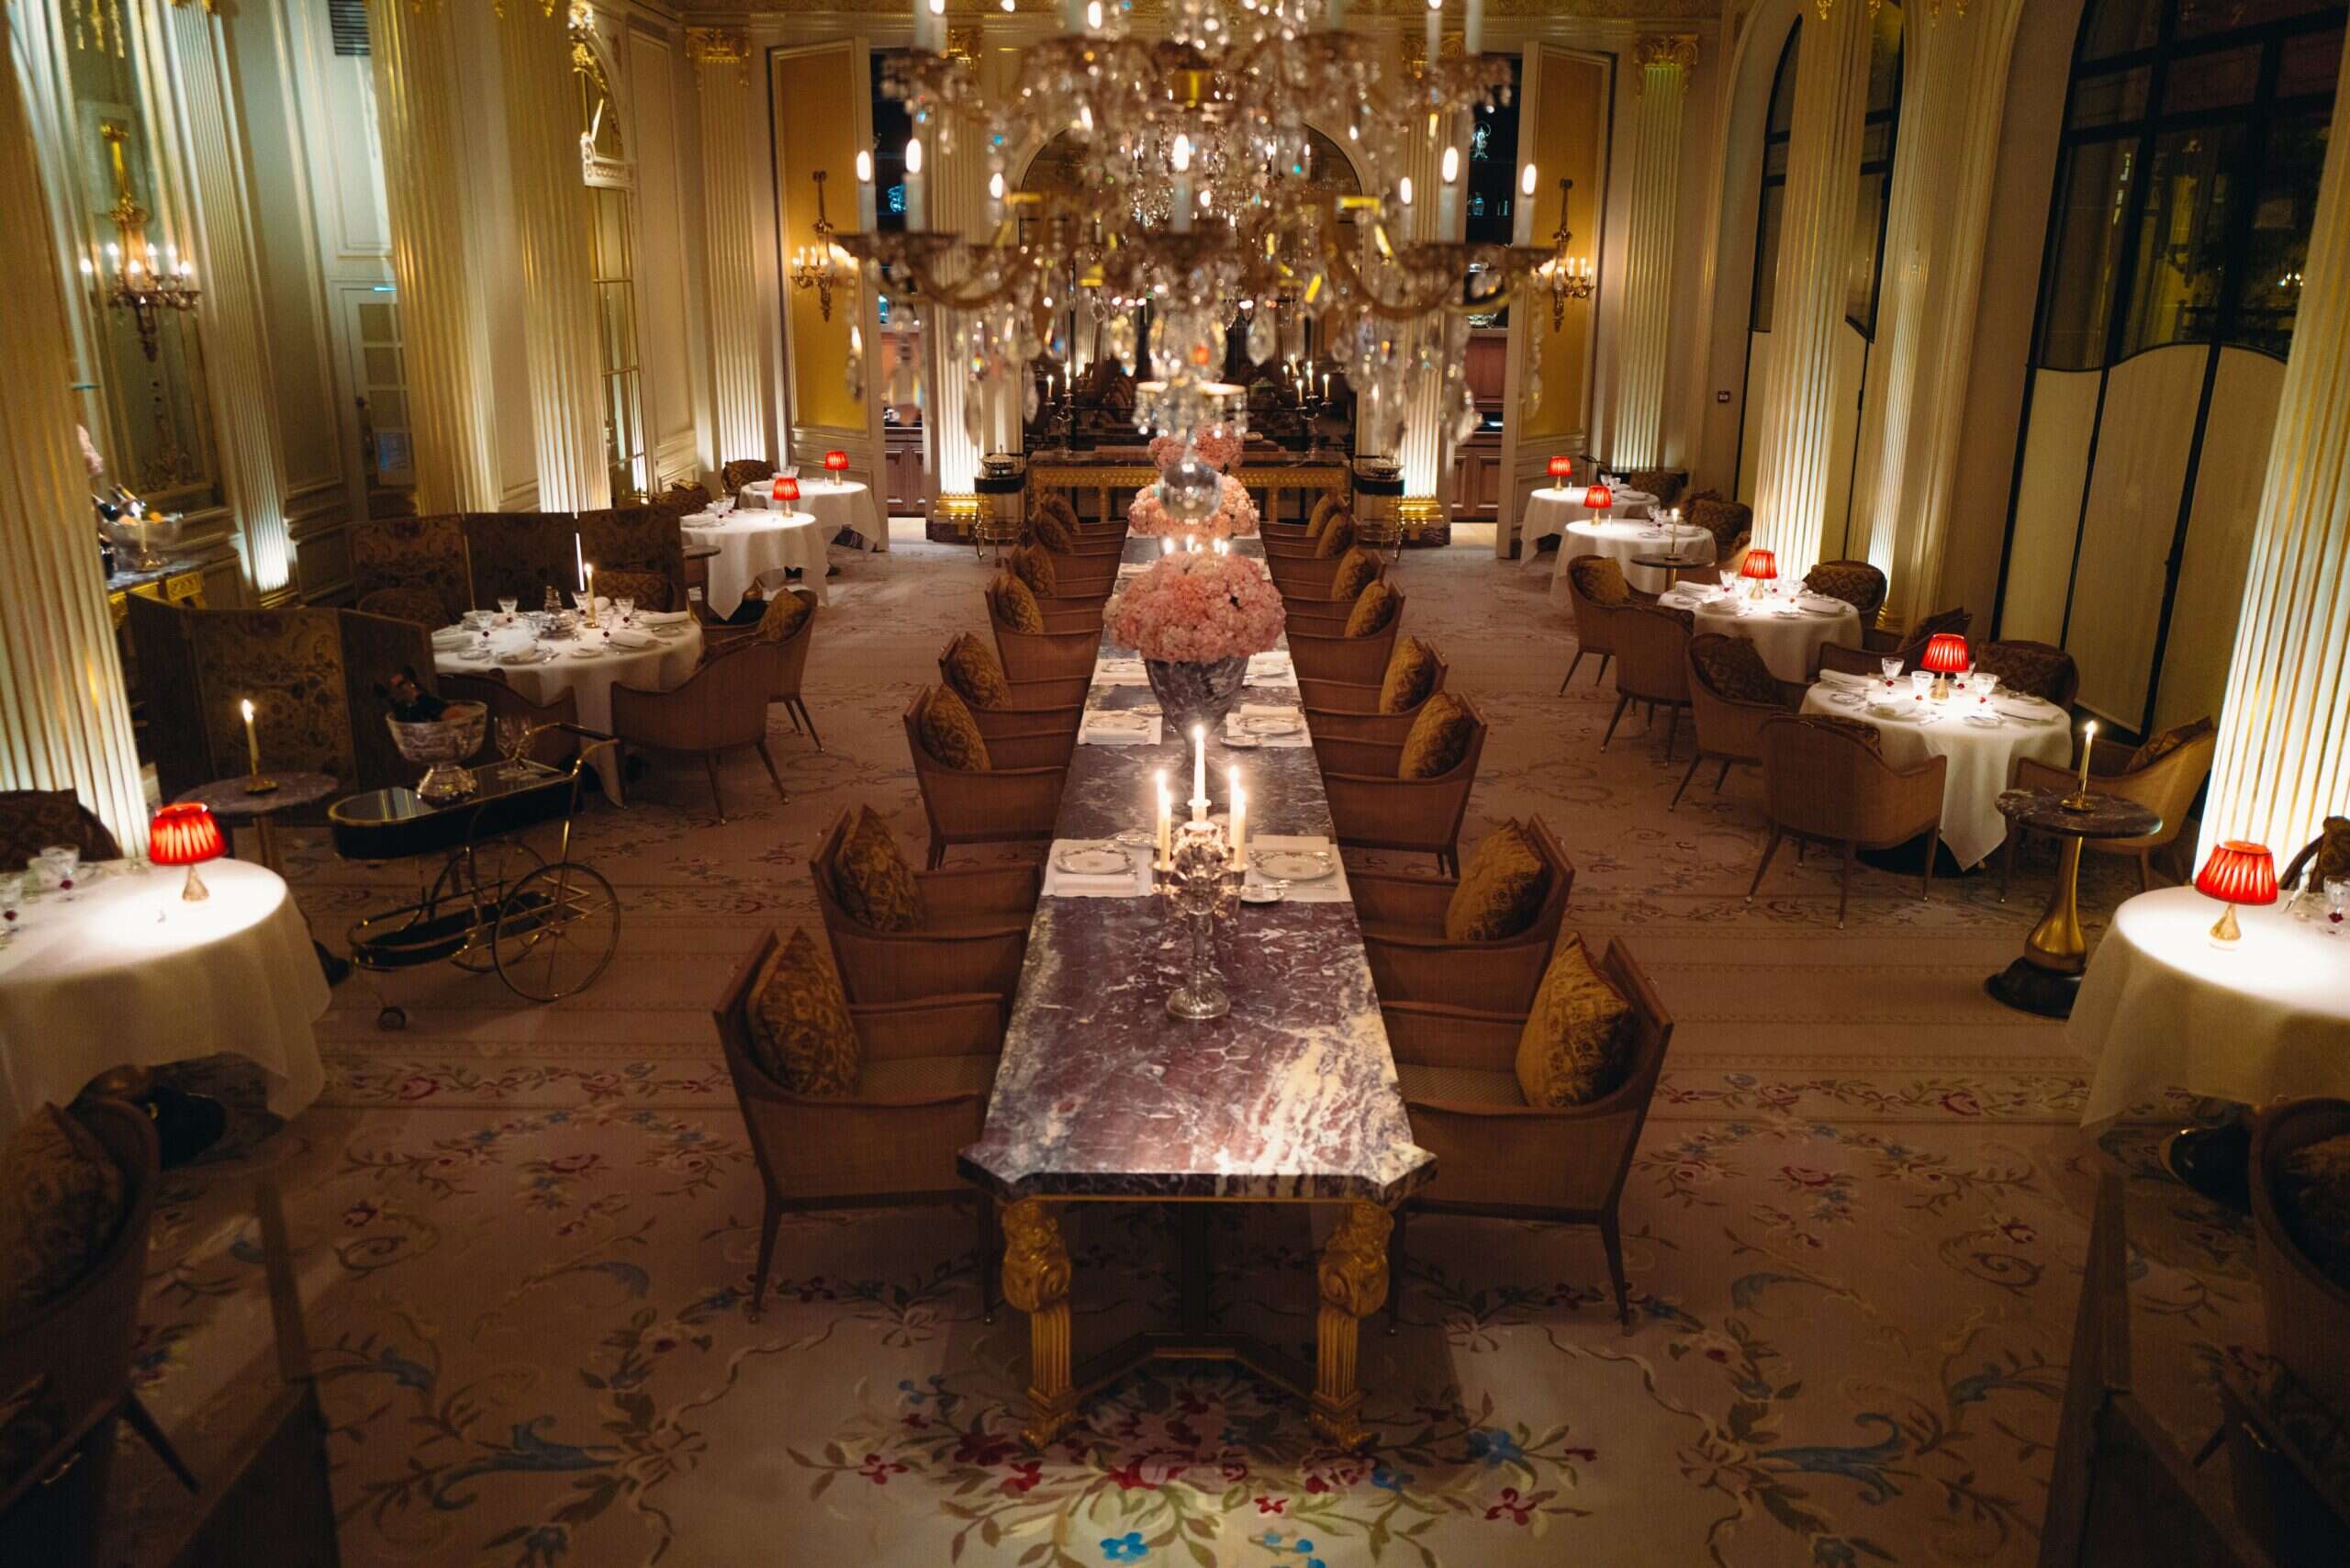 Jean Imbert Takes the Helm at Plaza Athénée